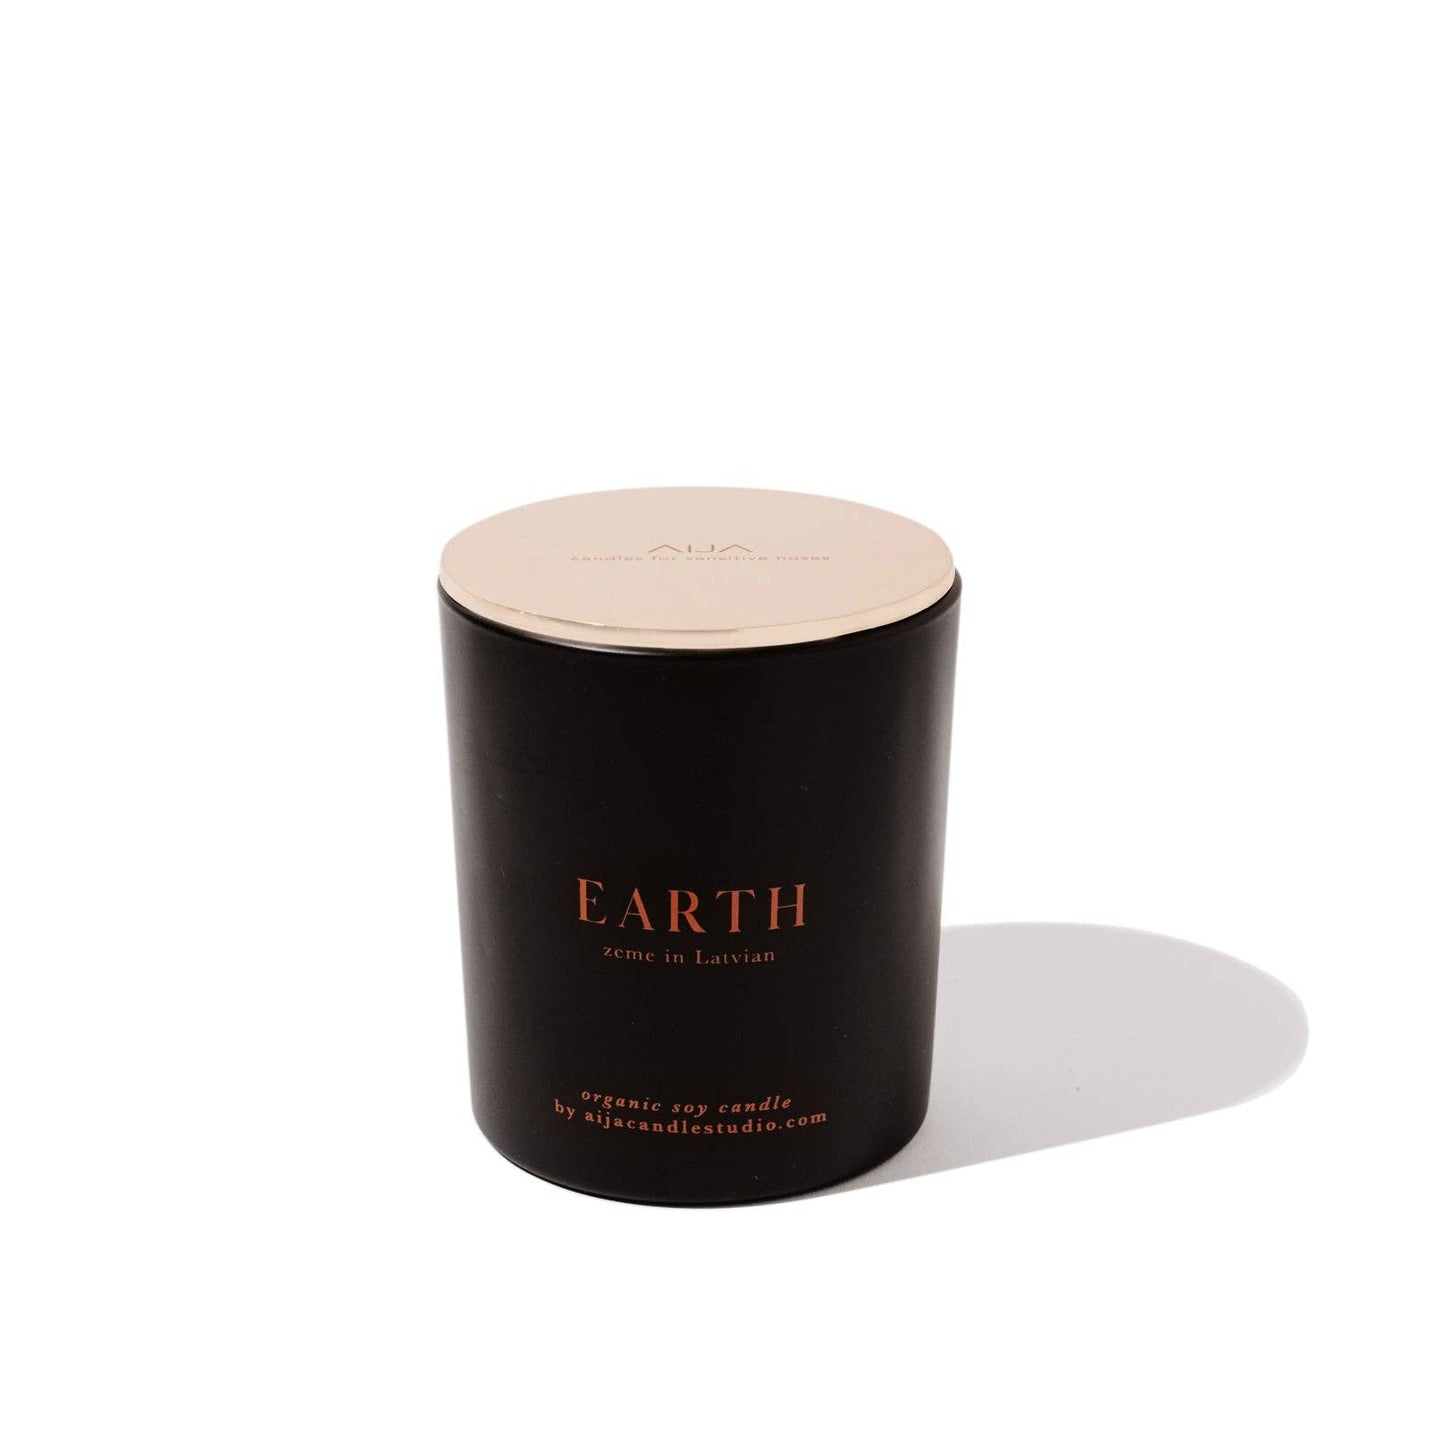 EARTH ORGANIC SOY CANDLE